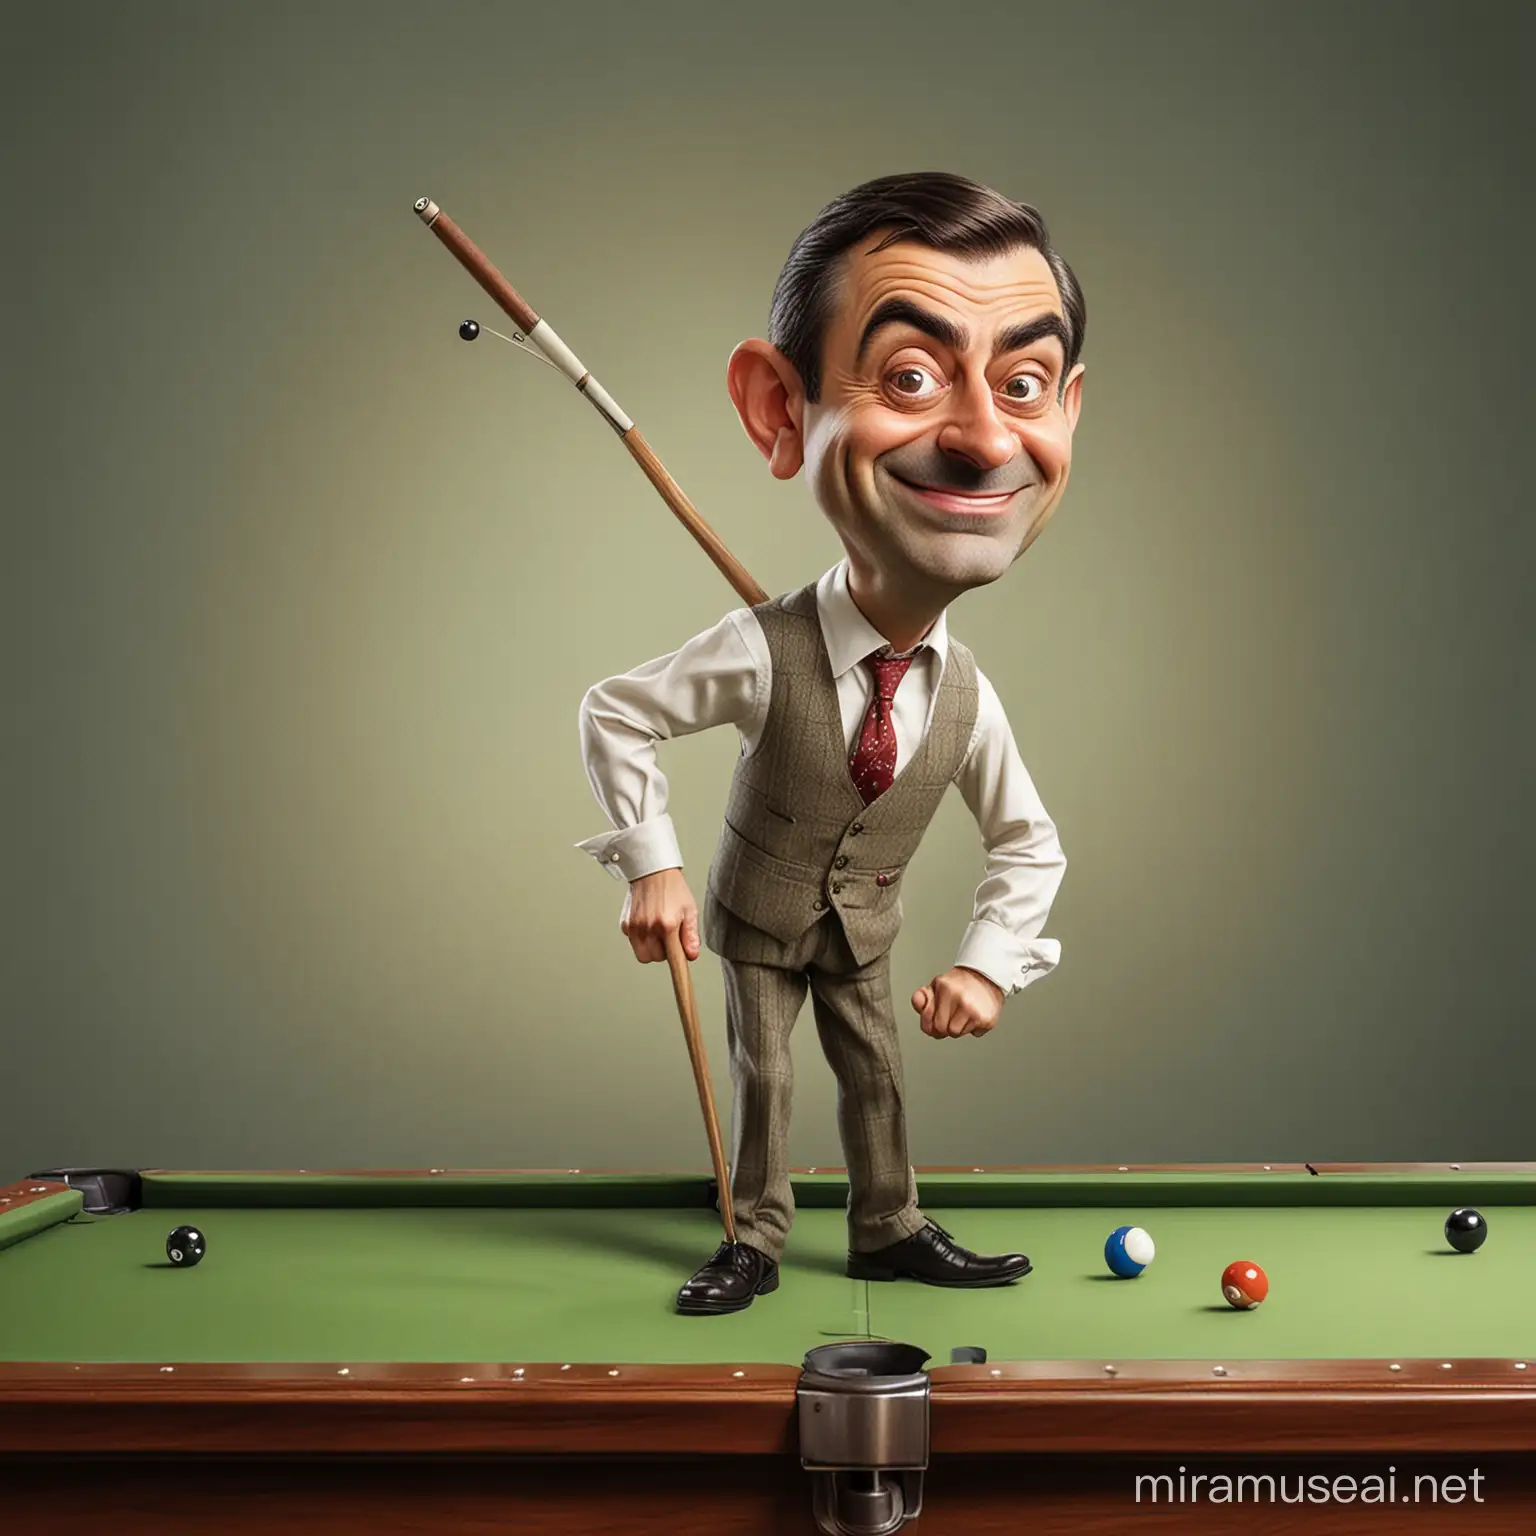 Cheerful Mr Bean Playing Billiards with Floating Balls